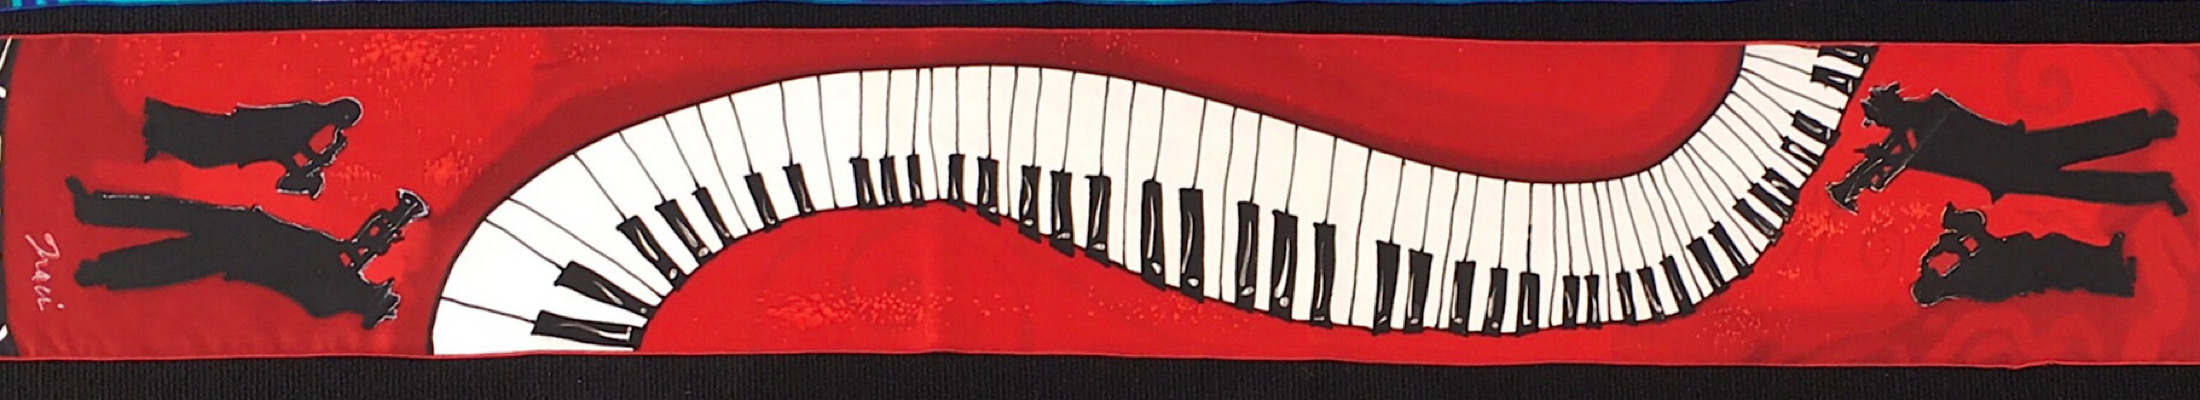 8" x 60" HOT JAZZ scarf picture